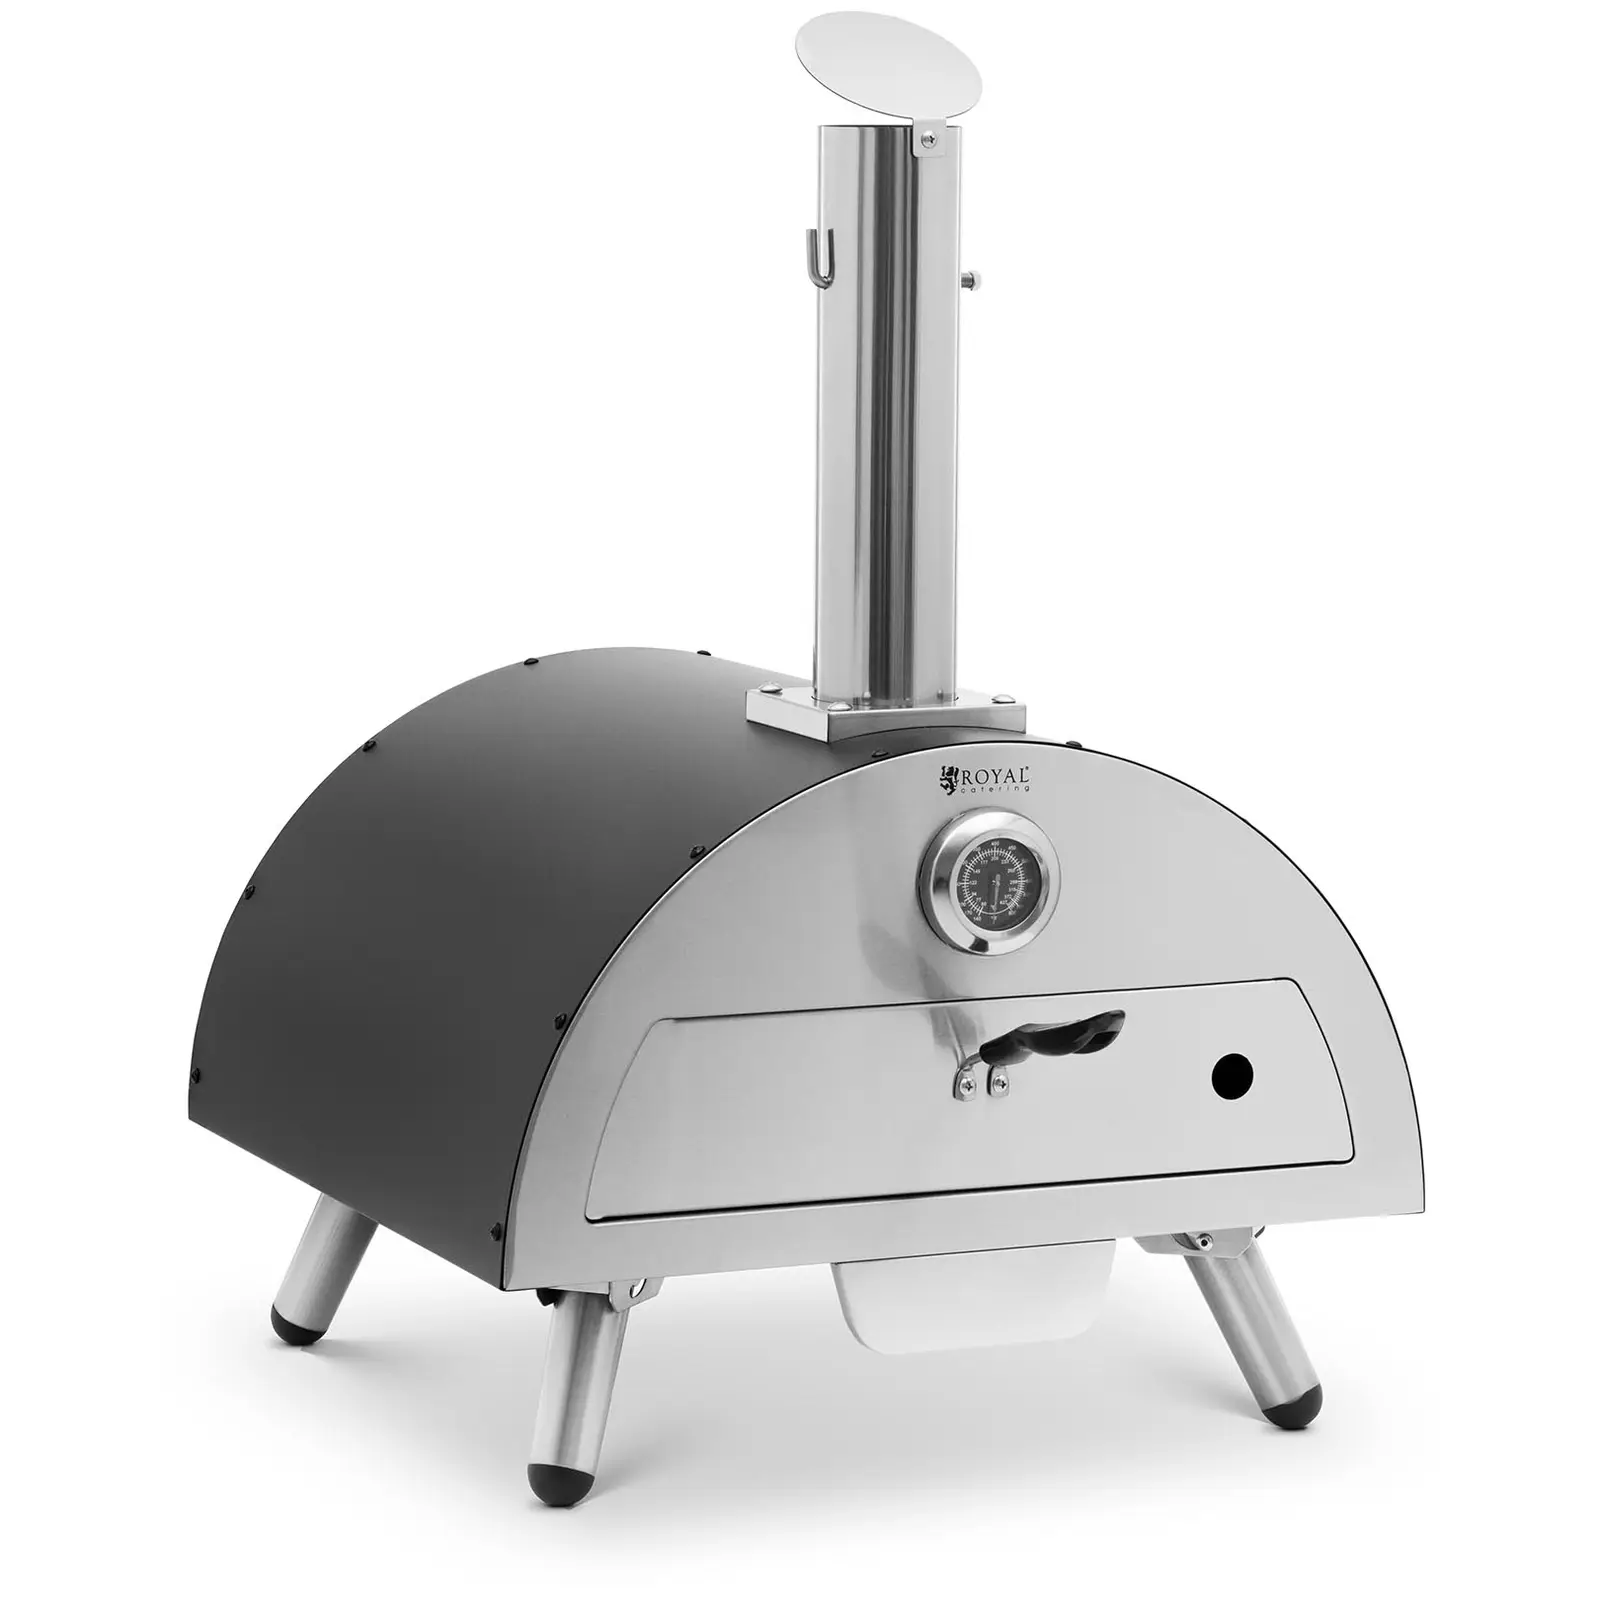 Wood Fired Pizza Oven - Cordierite - 430 ° C - Ø 33 cm - Royal Catering